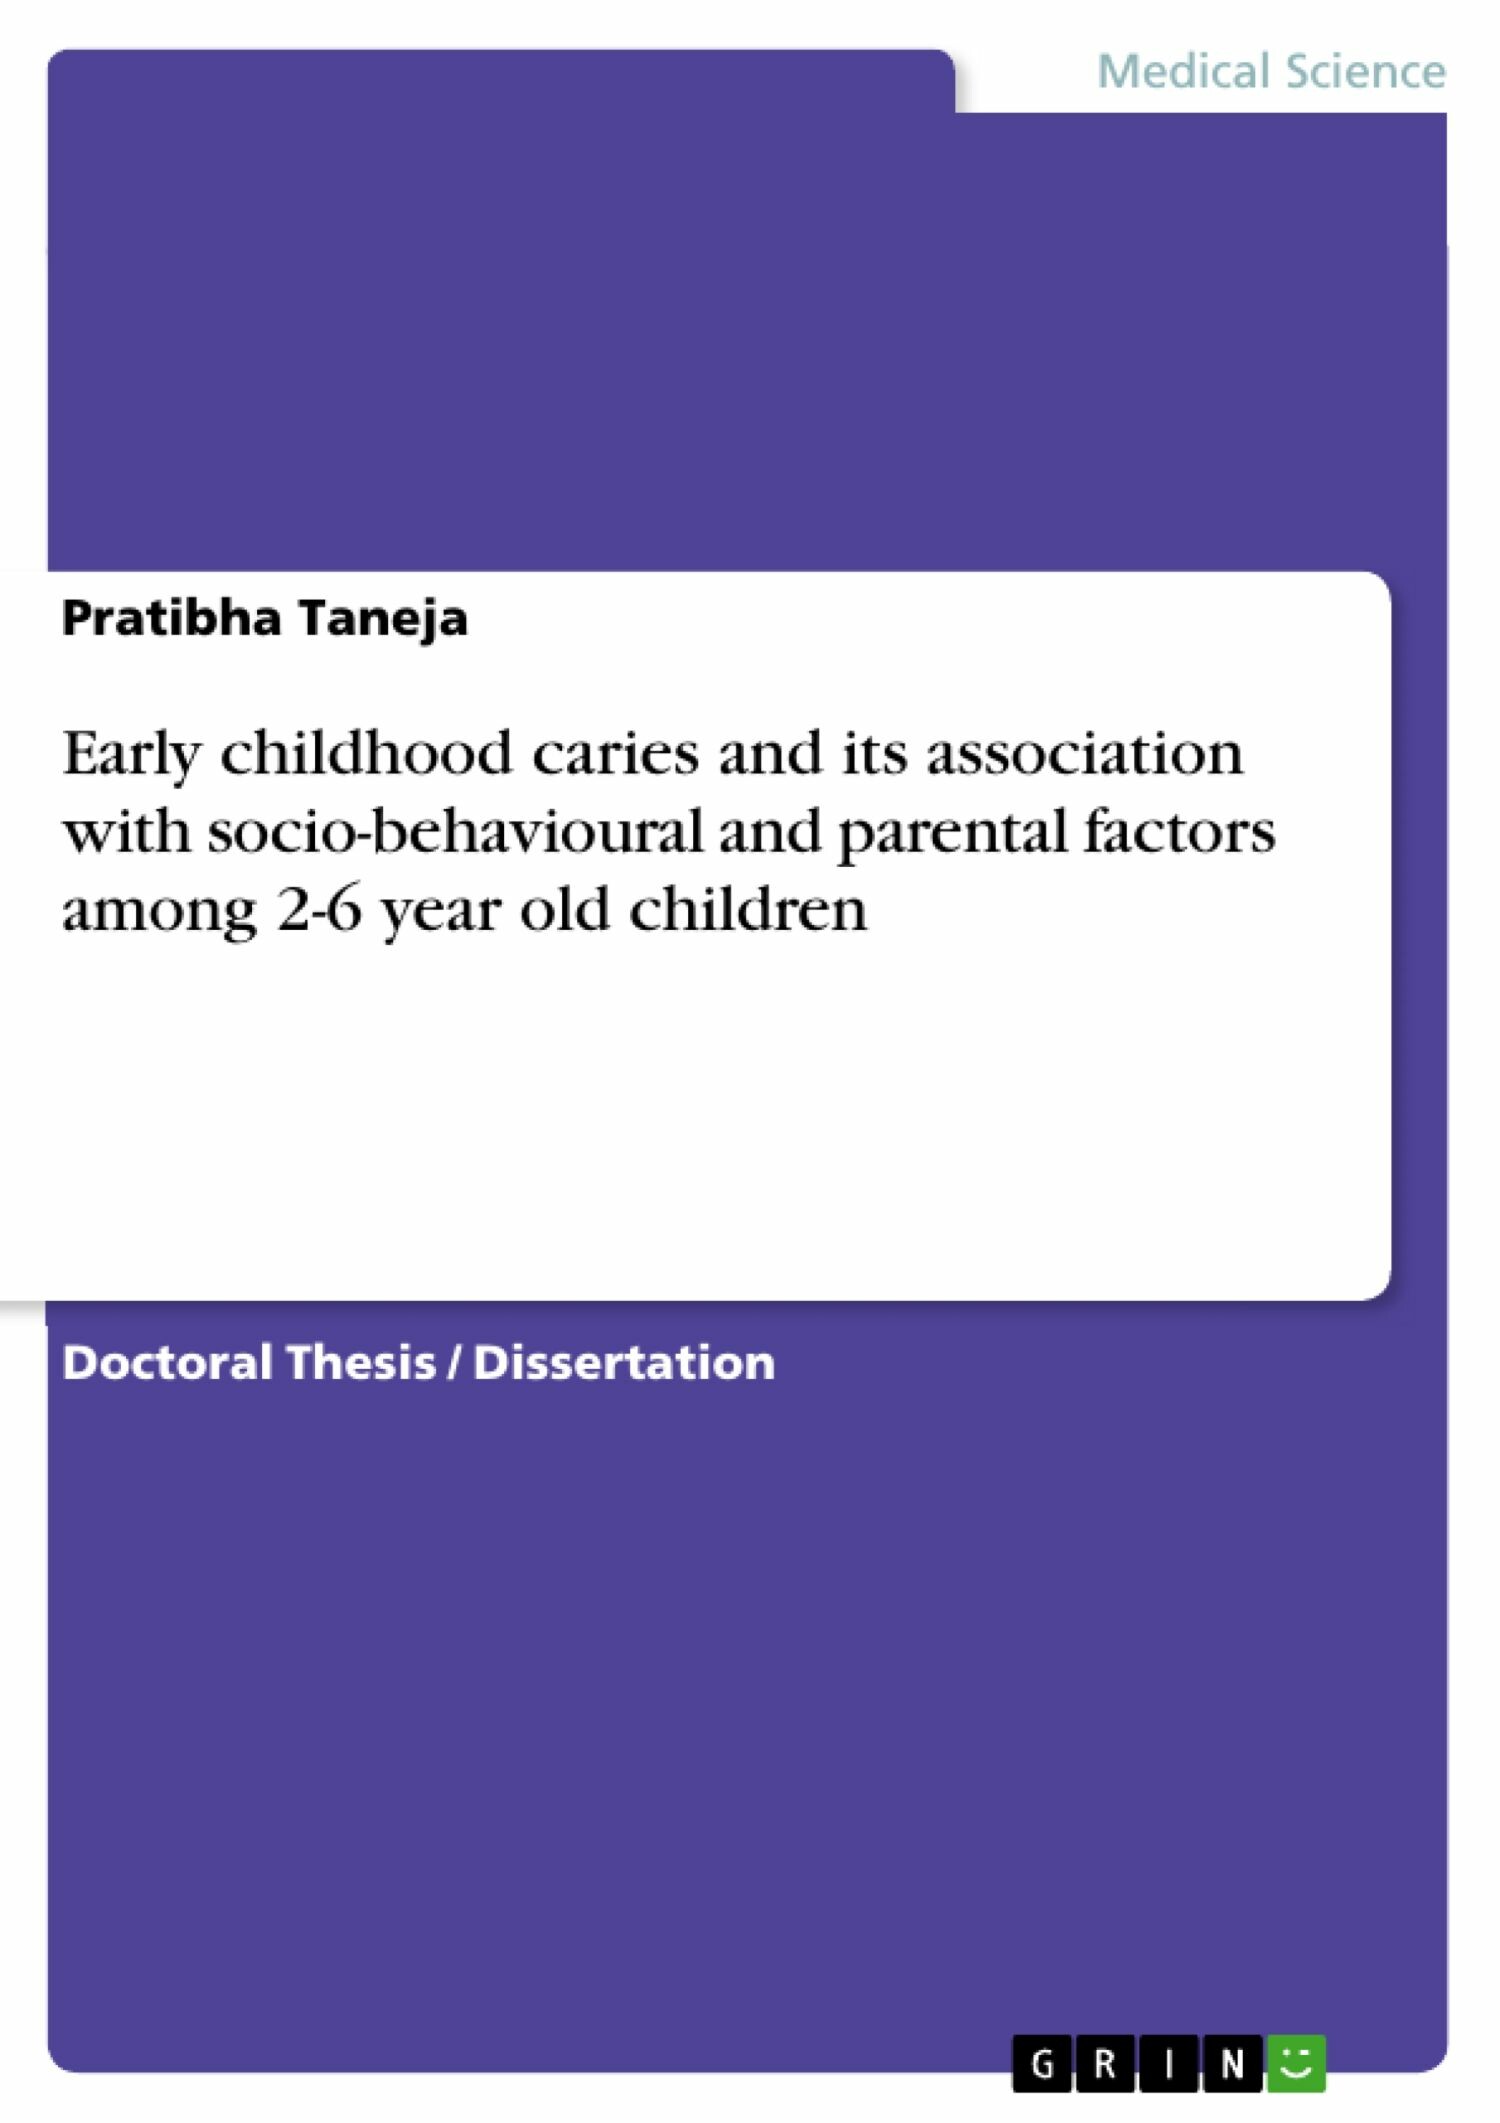 Early childhood caries and its association with socio-behavioural and parental factors among 2-6 year old children